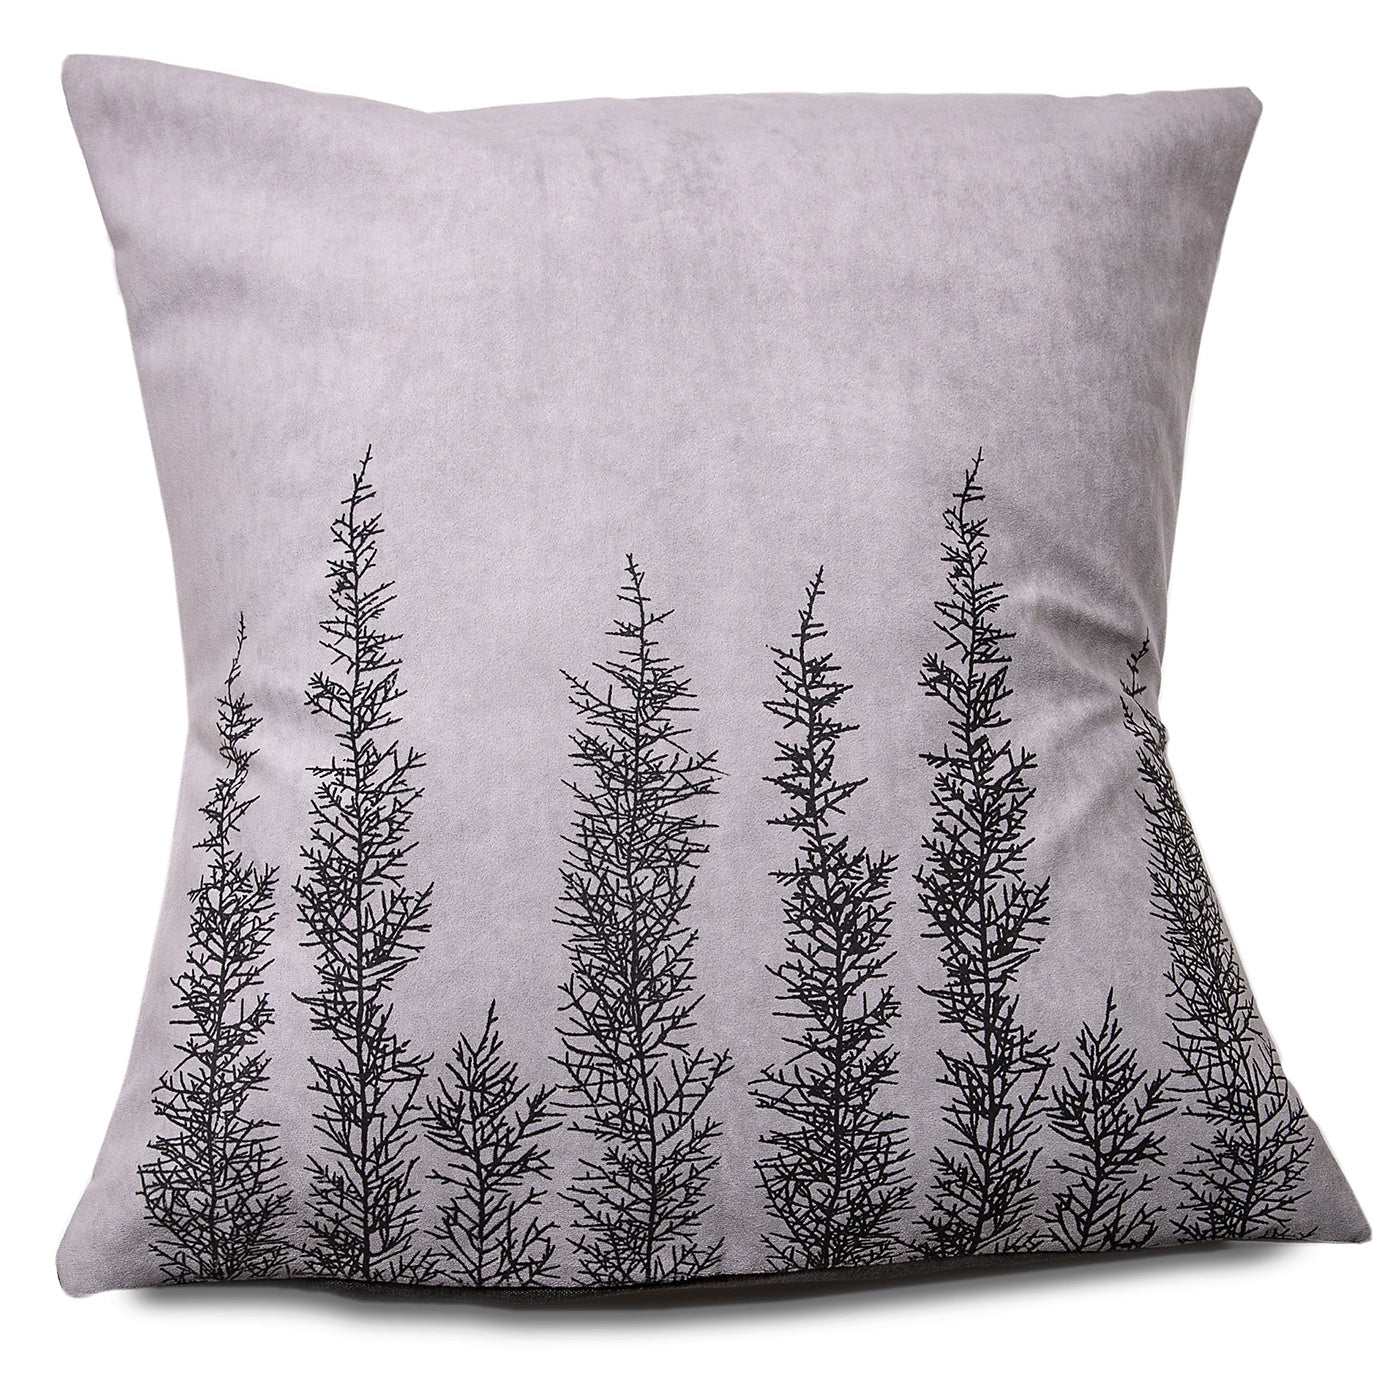 Stalley Textile Co. - Cushion Cover - Huon Pine - Black on Light Grey